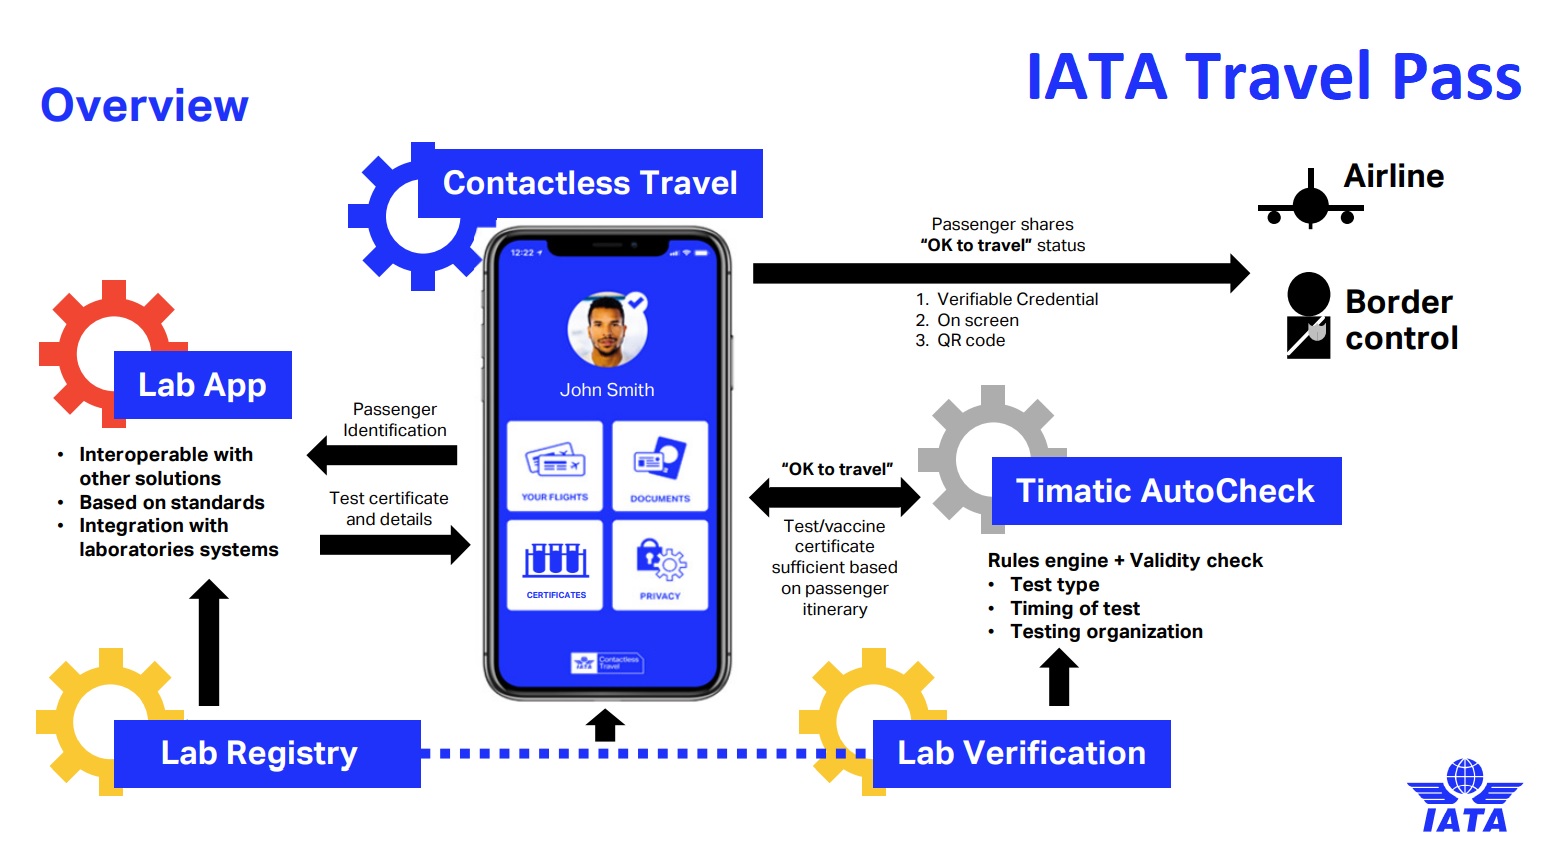 The IATA Travel Pass will help to reduce the risk of fake COVID19 test / vaccine certificates being used to travel, and eventually lead to a contactless travel experience. But where does the IATA Travel Pass app begin and end? That's one of the questions Steven Howard asks Vinoop Goel, IATA's Regional Director Airports and External Relations - Asia Pacific Click to enlarge.